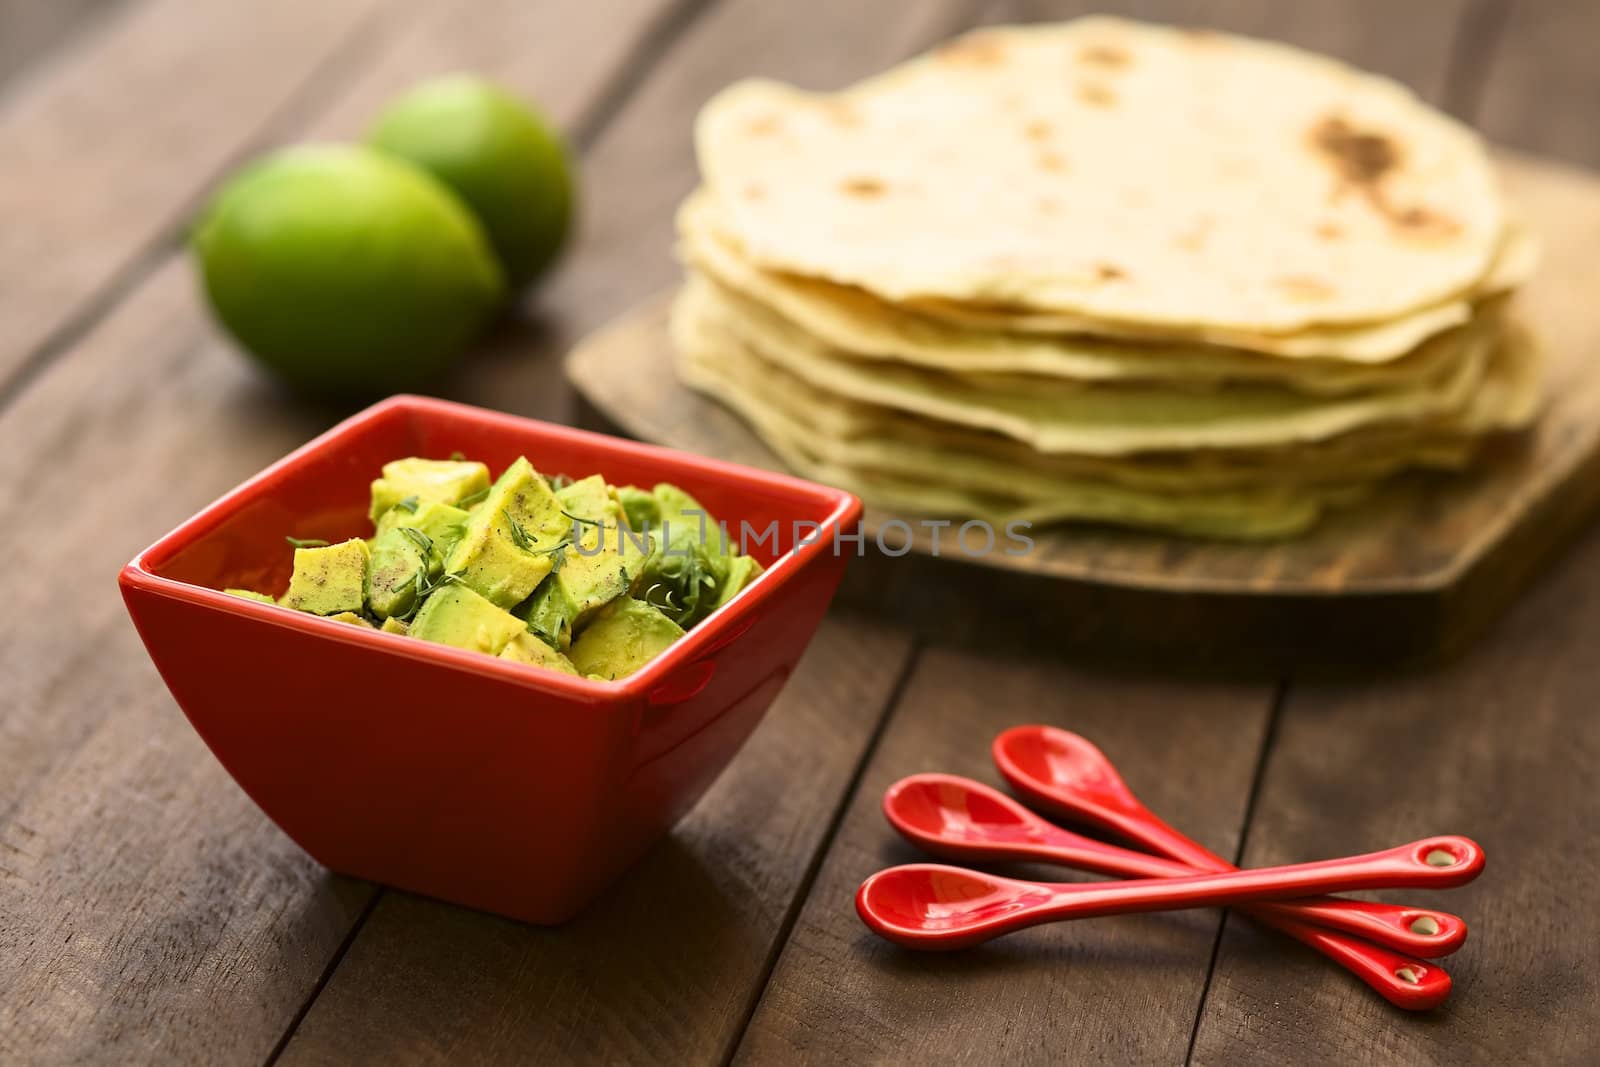 Fresh avocado salad prepared with lime juice, pepper, salt and sprinkled with fresh coriander leaves, homemade tortillas in the back (Selective Focus, Focus in the middle of the salad)  